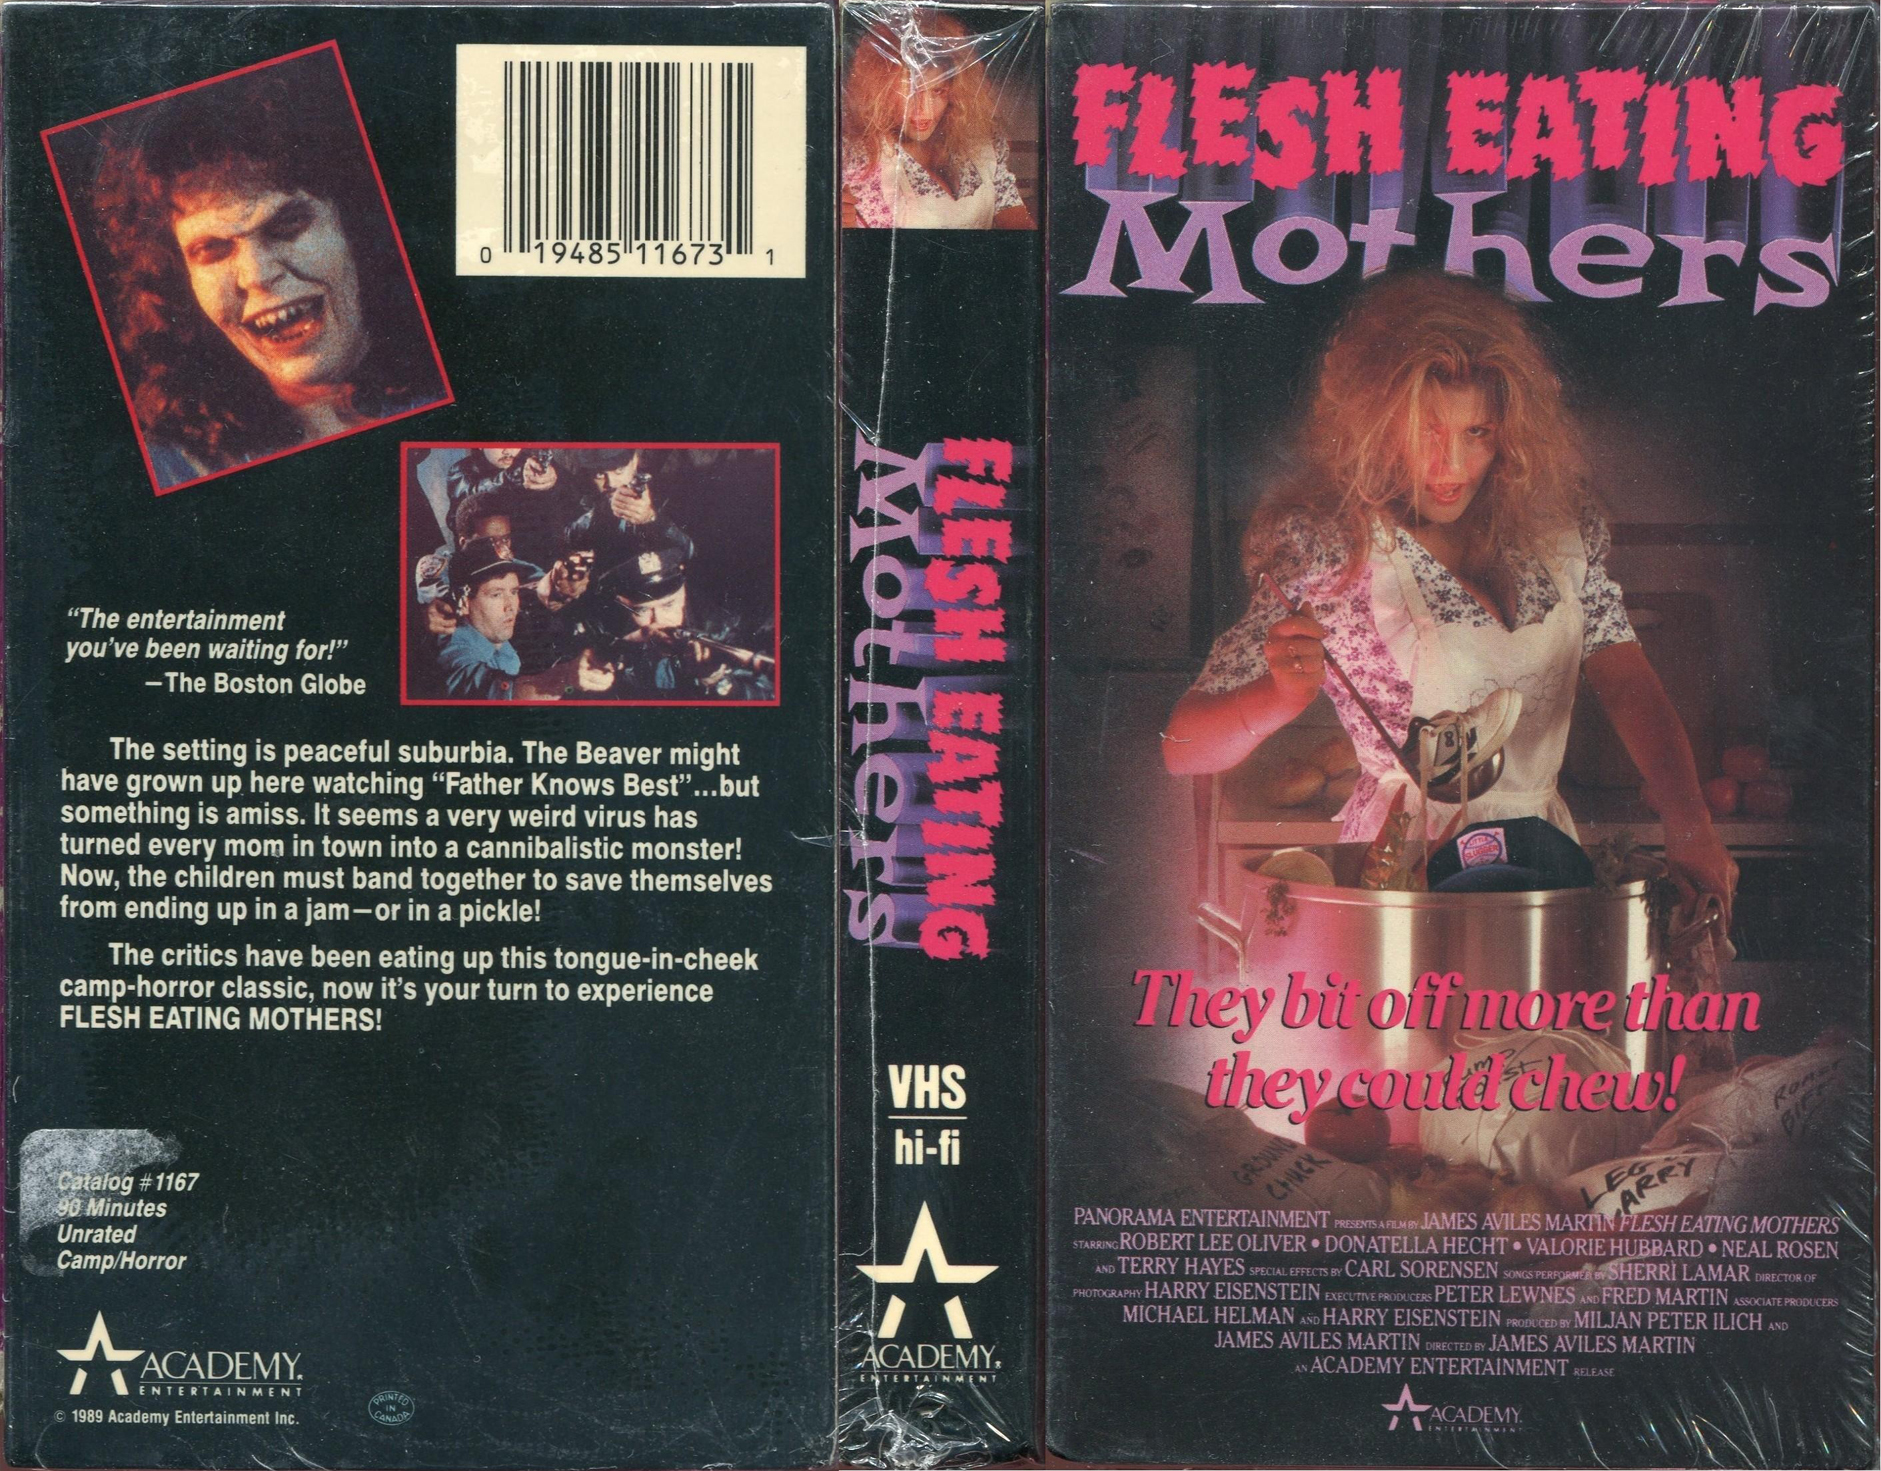 VHS WASTELAND, YOUR HOME FOR HIGH RESOLUTION SCANS OF RARE, STRANGE, AND FORGOTTEN VHS COVERS pic pic